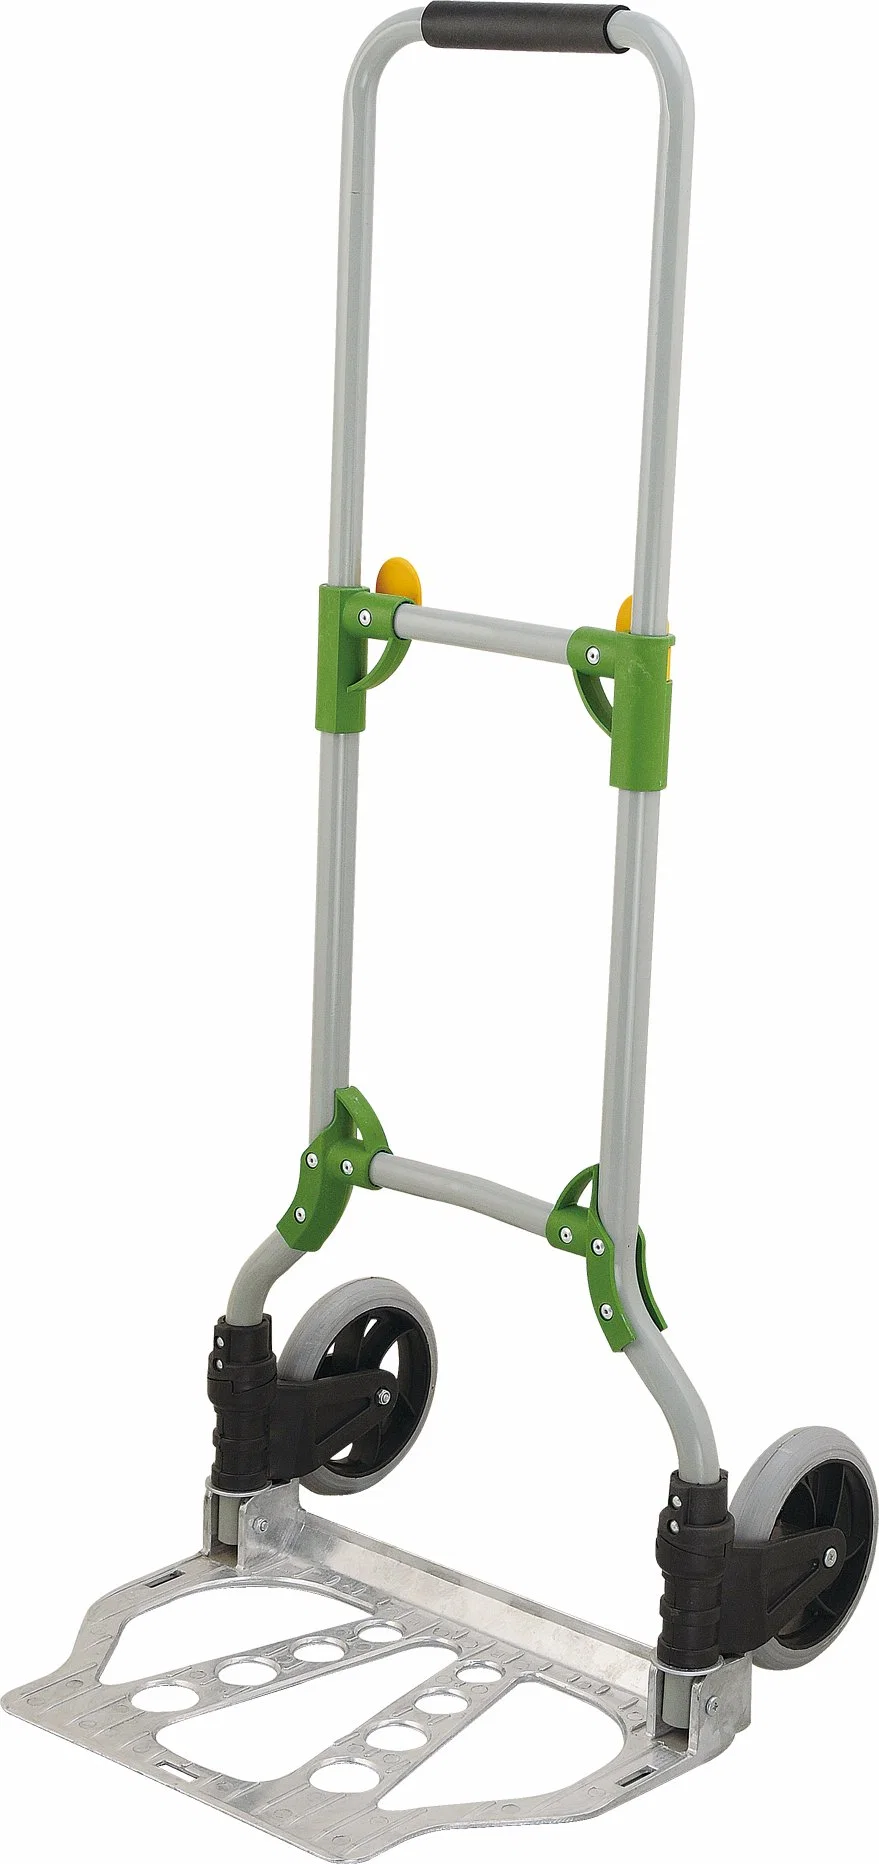 Folding Hand Truck, Portable Dolly Cart Foldable Lightweight 2 Wheels Push Cart Dolly for Moving